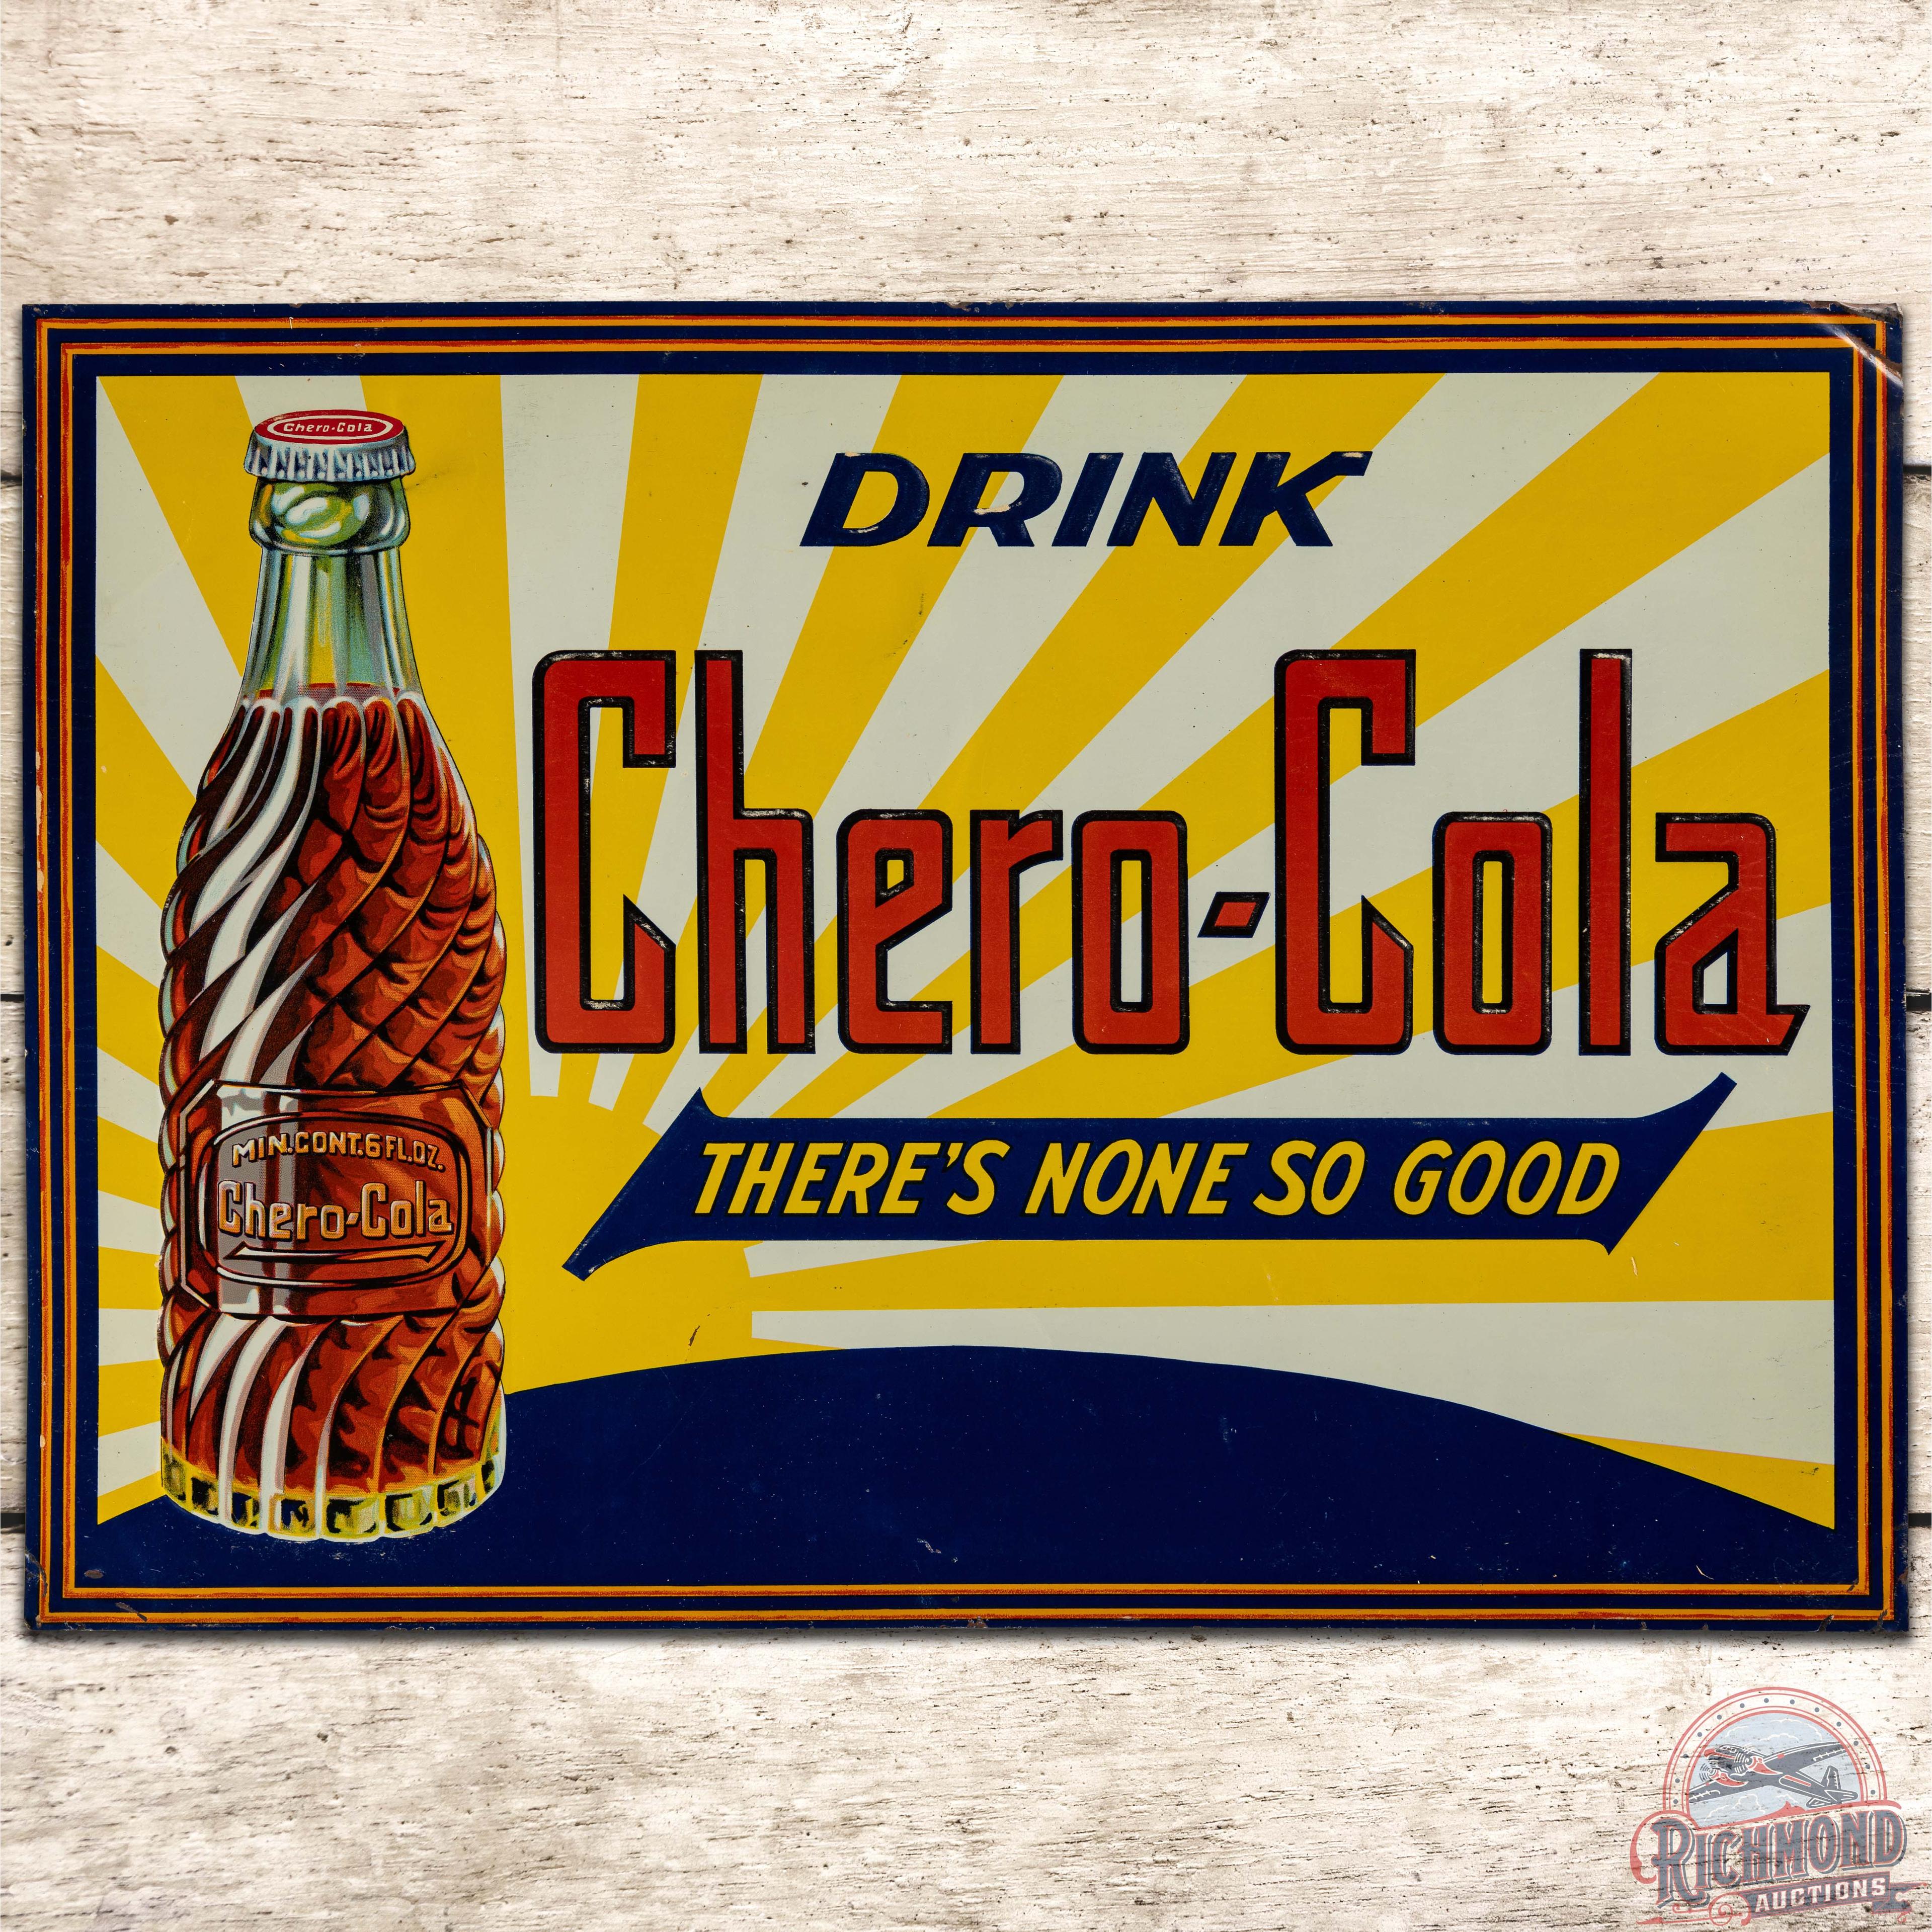 Drink Chero Cola "There's None So Good" Embossed SS Tin Sign w/ Bottle